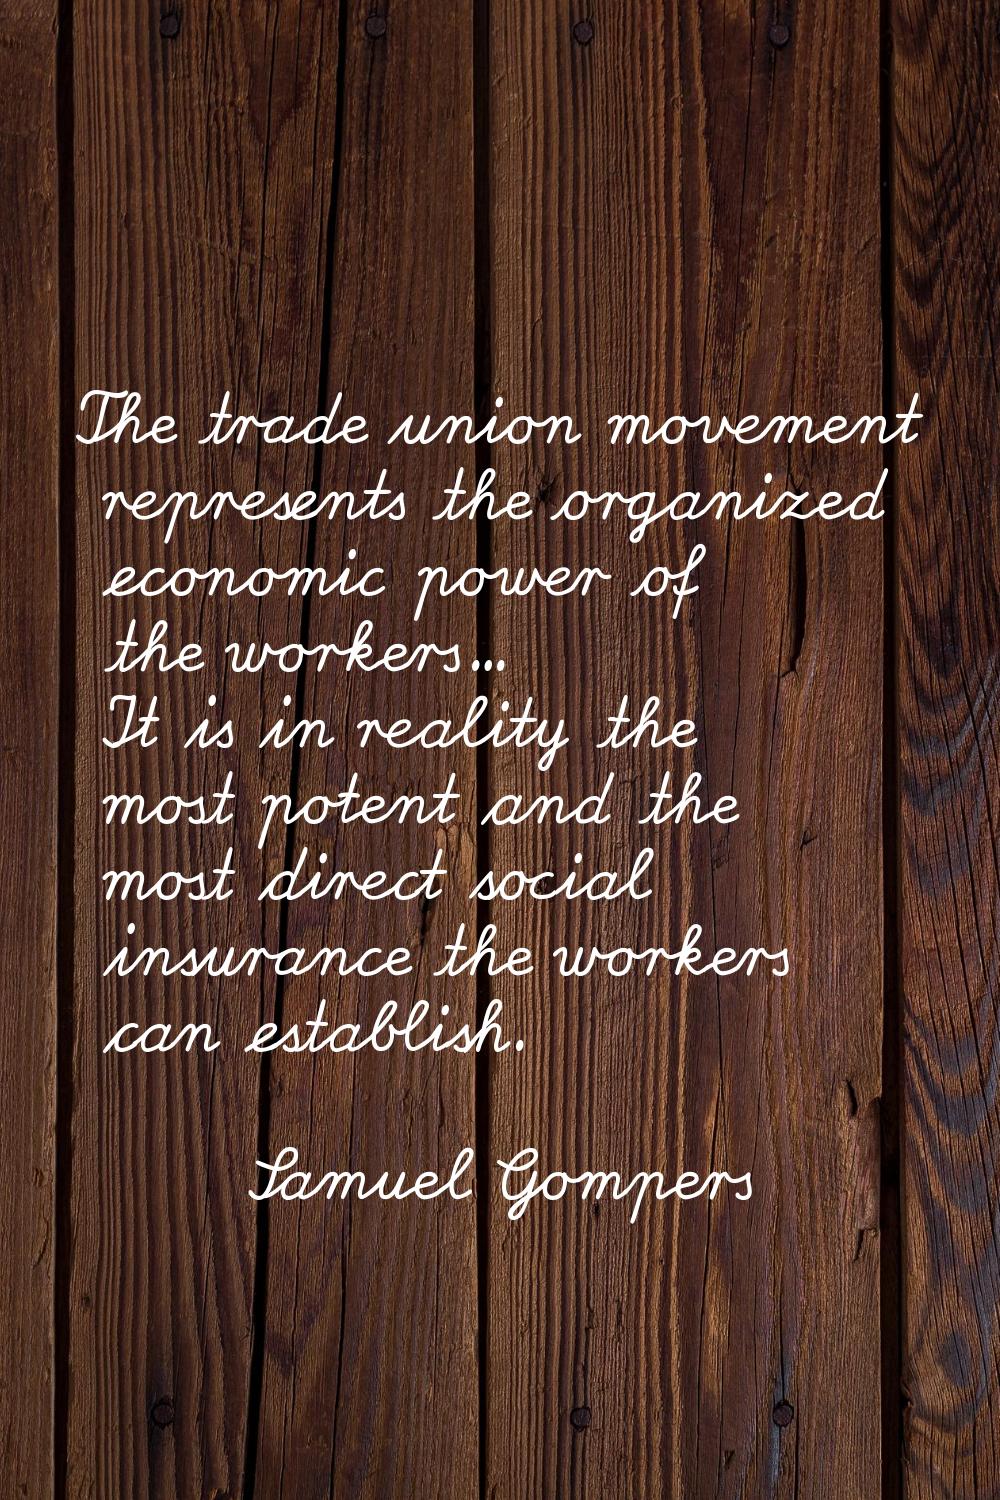 The trade union movement represents the organized economic power of the workers... It is in reality